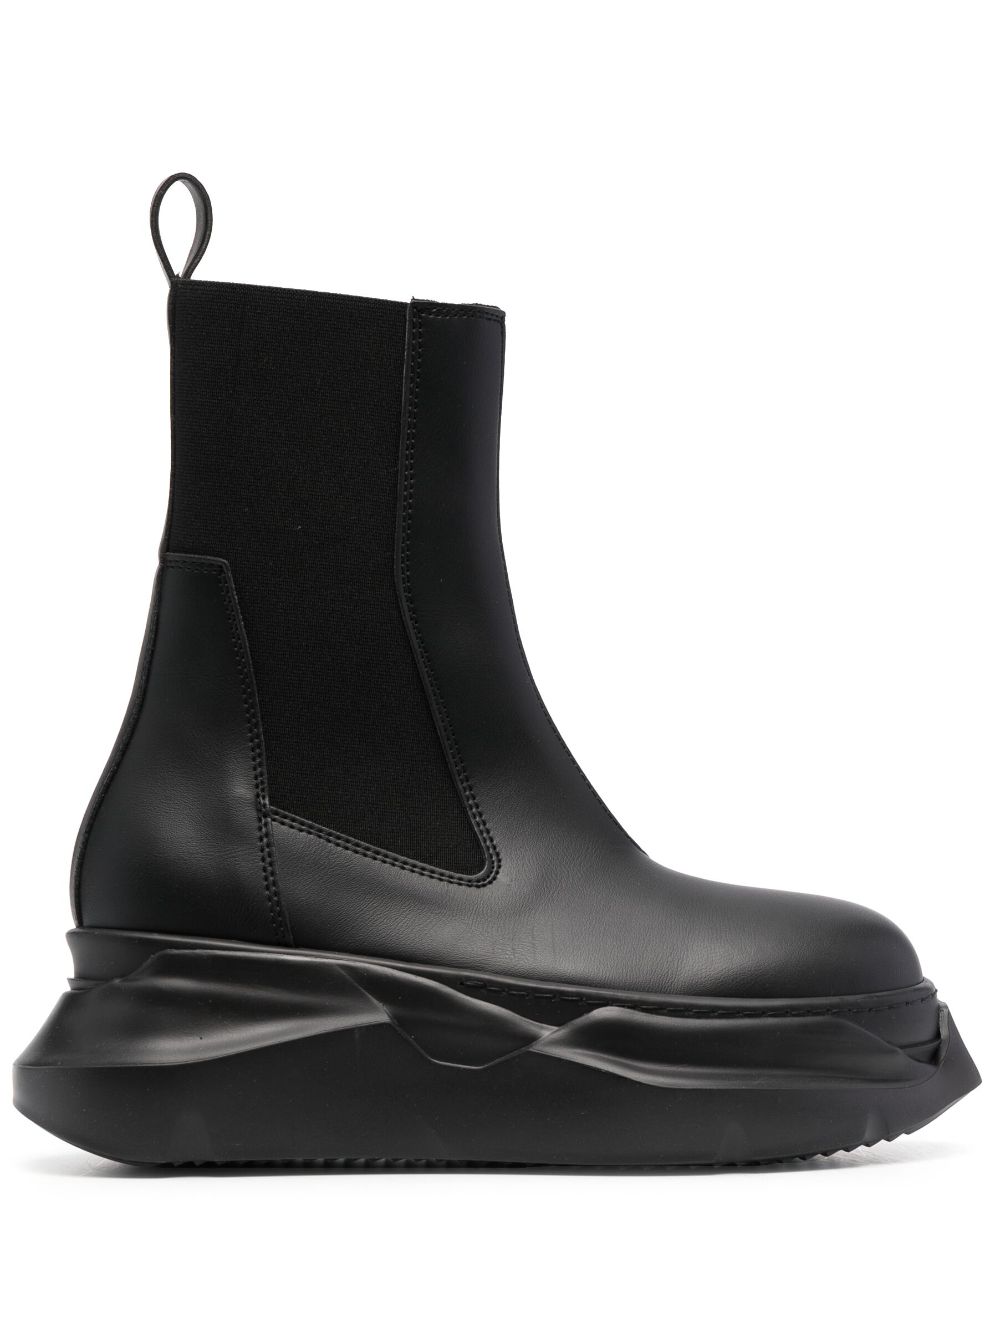 Rick Owens DRKSHDW Beetle Leather Ankle Boots - Farfetch